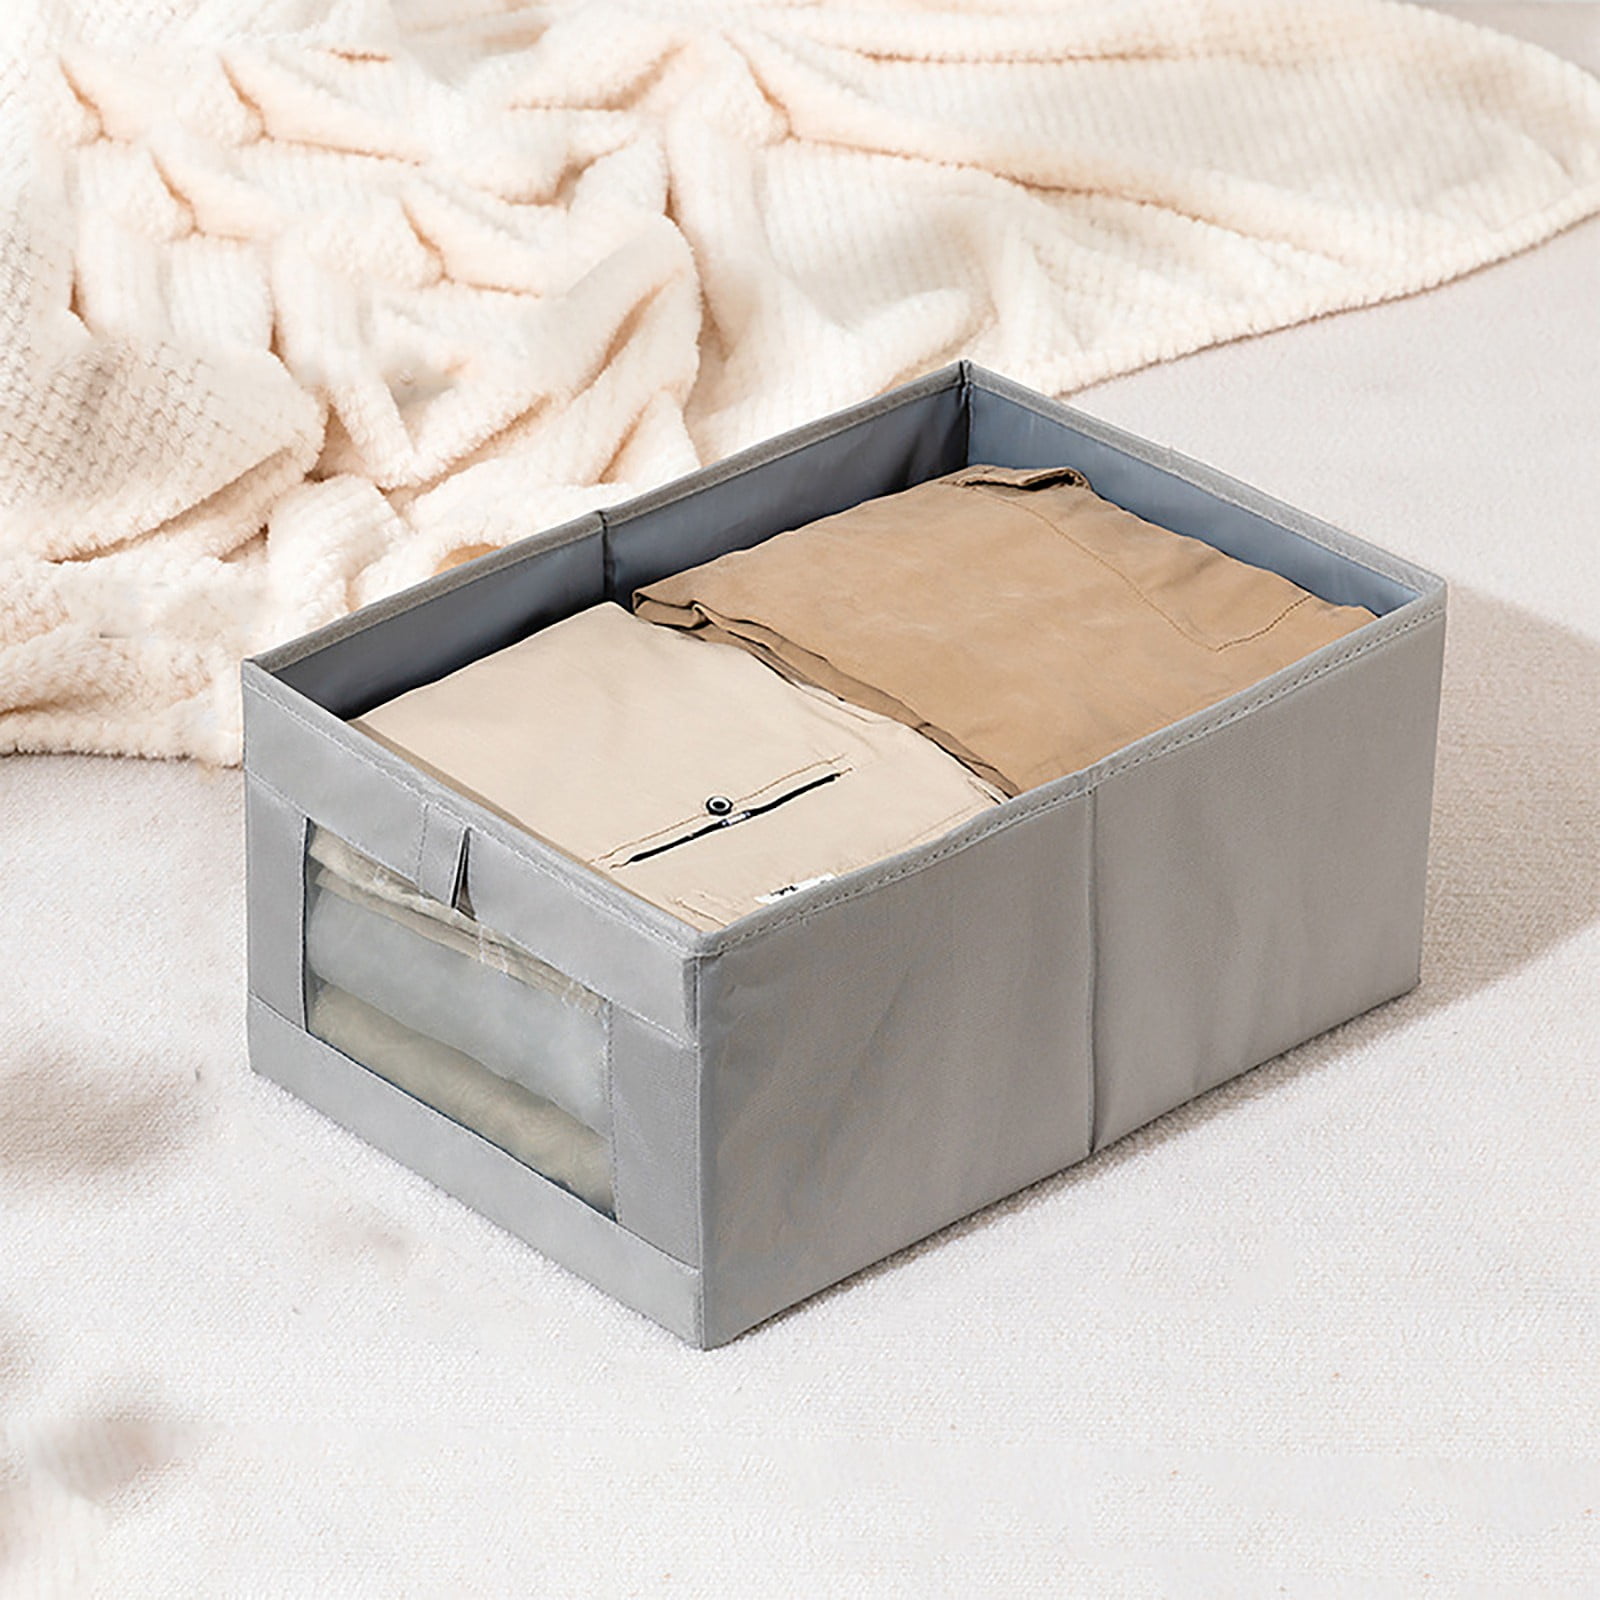 Dinmmgg Storage Clothes Compartment Storage Mesh Compartment Drawer Bag ...